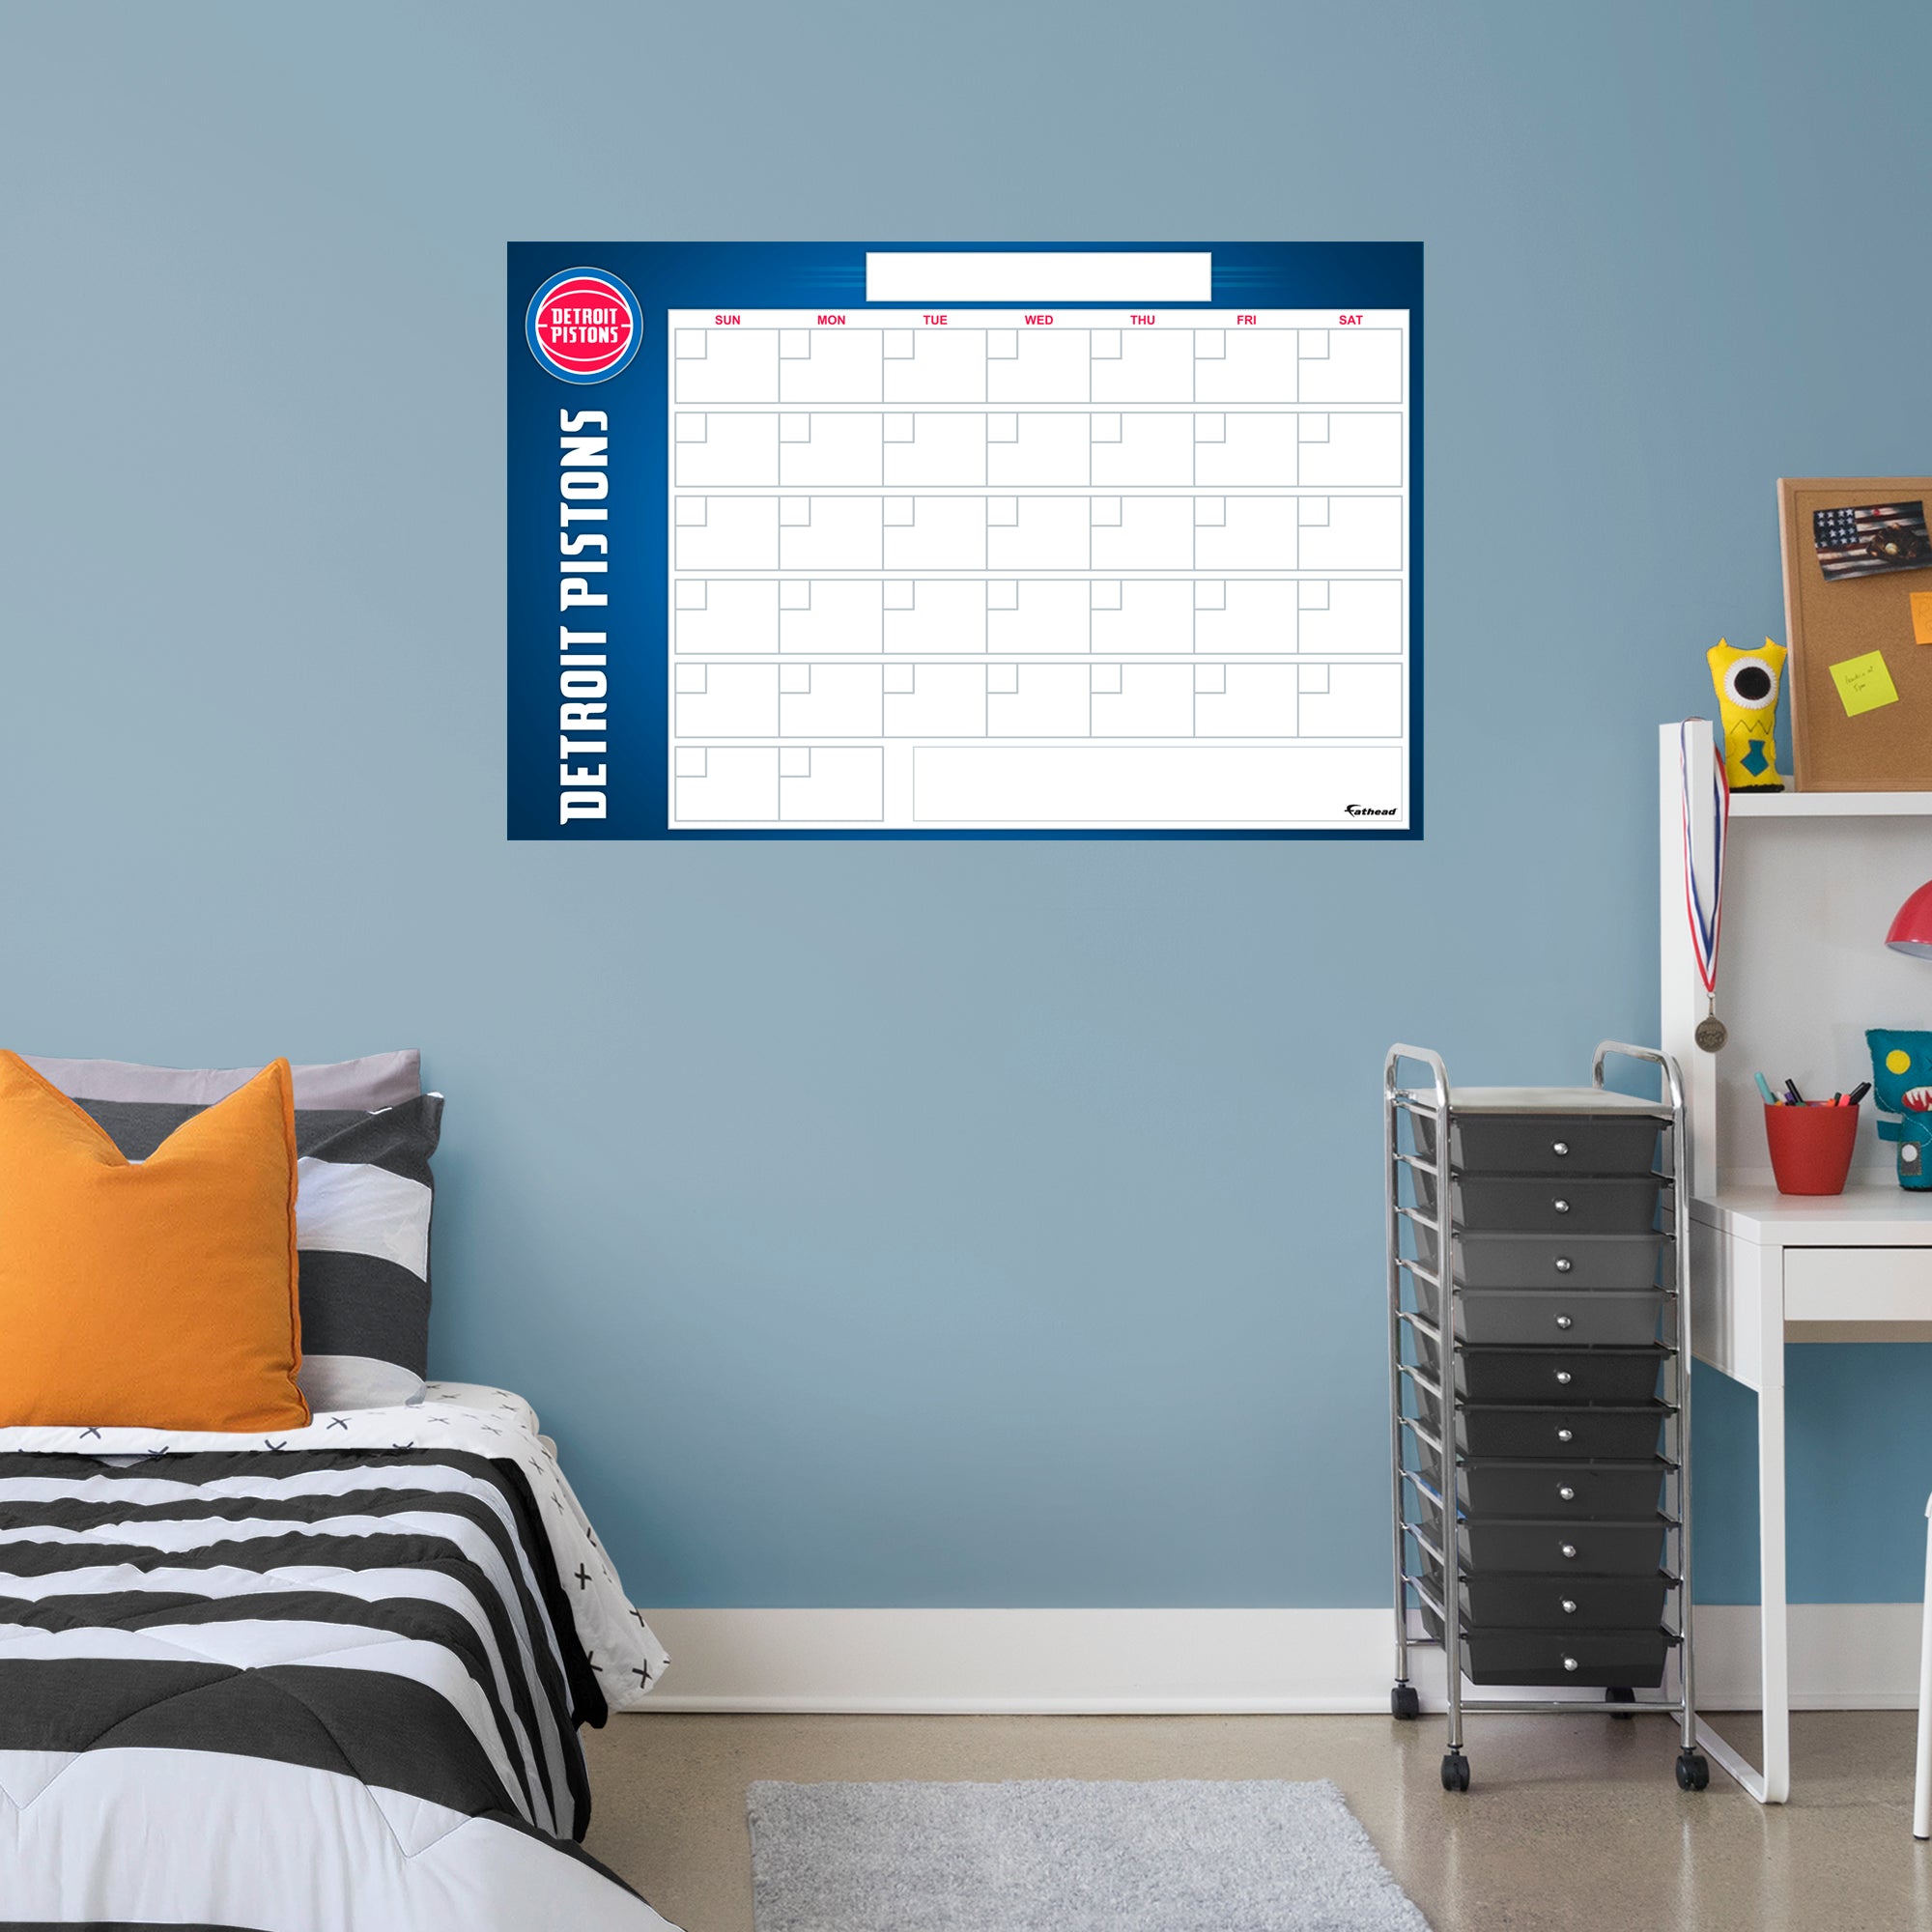 Detroit Pistons Dry Erase Calendar - Officially Licensed NBA Removable Wall Decal Giant Decal (34"W x 52"H) by Fathead | Vinyl